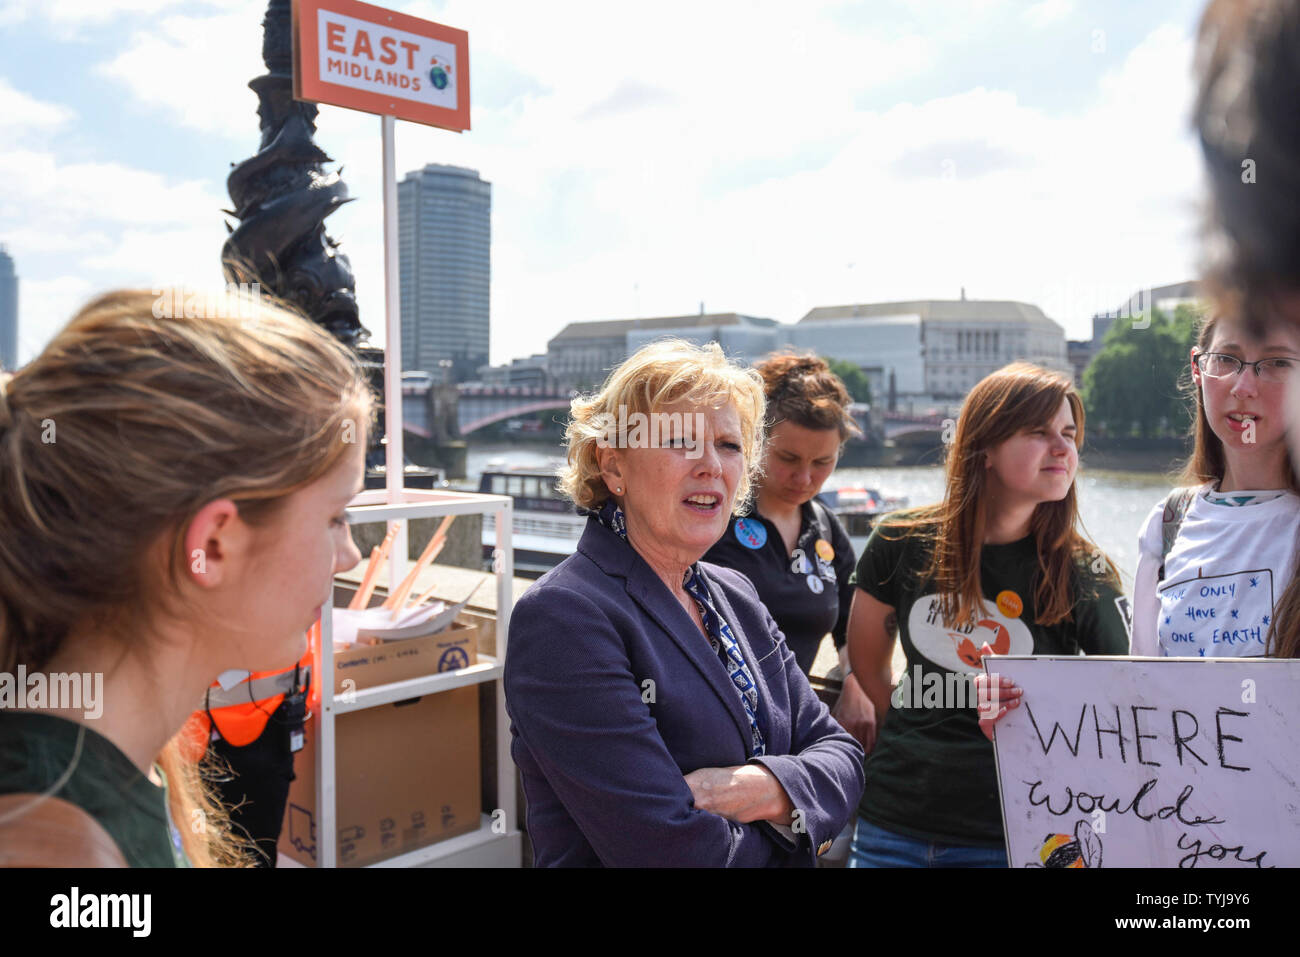 London, UK.  26 June 2019.  Anna Soubry, MP for Broxtowe in Nottinghamshire, meets people taking part in a 'Time Is Now' mass lobby around Parliament.  Activists are attempting to deliver a message to MPs that to tackle the environmental crisis, a strong Environment Bill is passed that can restore nature, cut plastic pollution and improve air quality.  Similar gatherings are taking place across the UK.  Credit: Stephen Chung / Alamy Live News Stock Photo